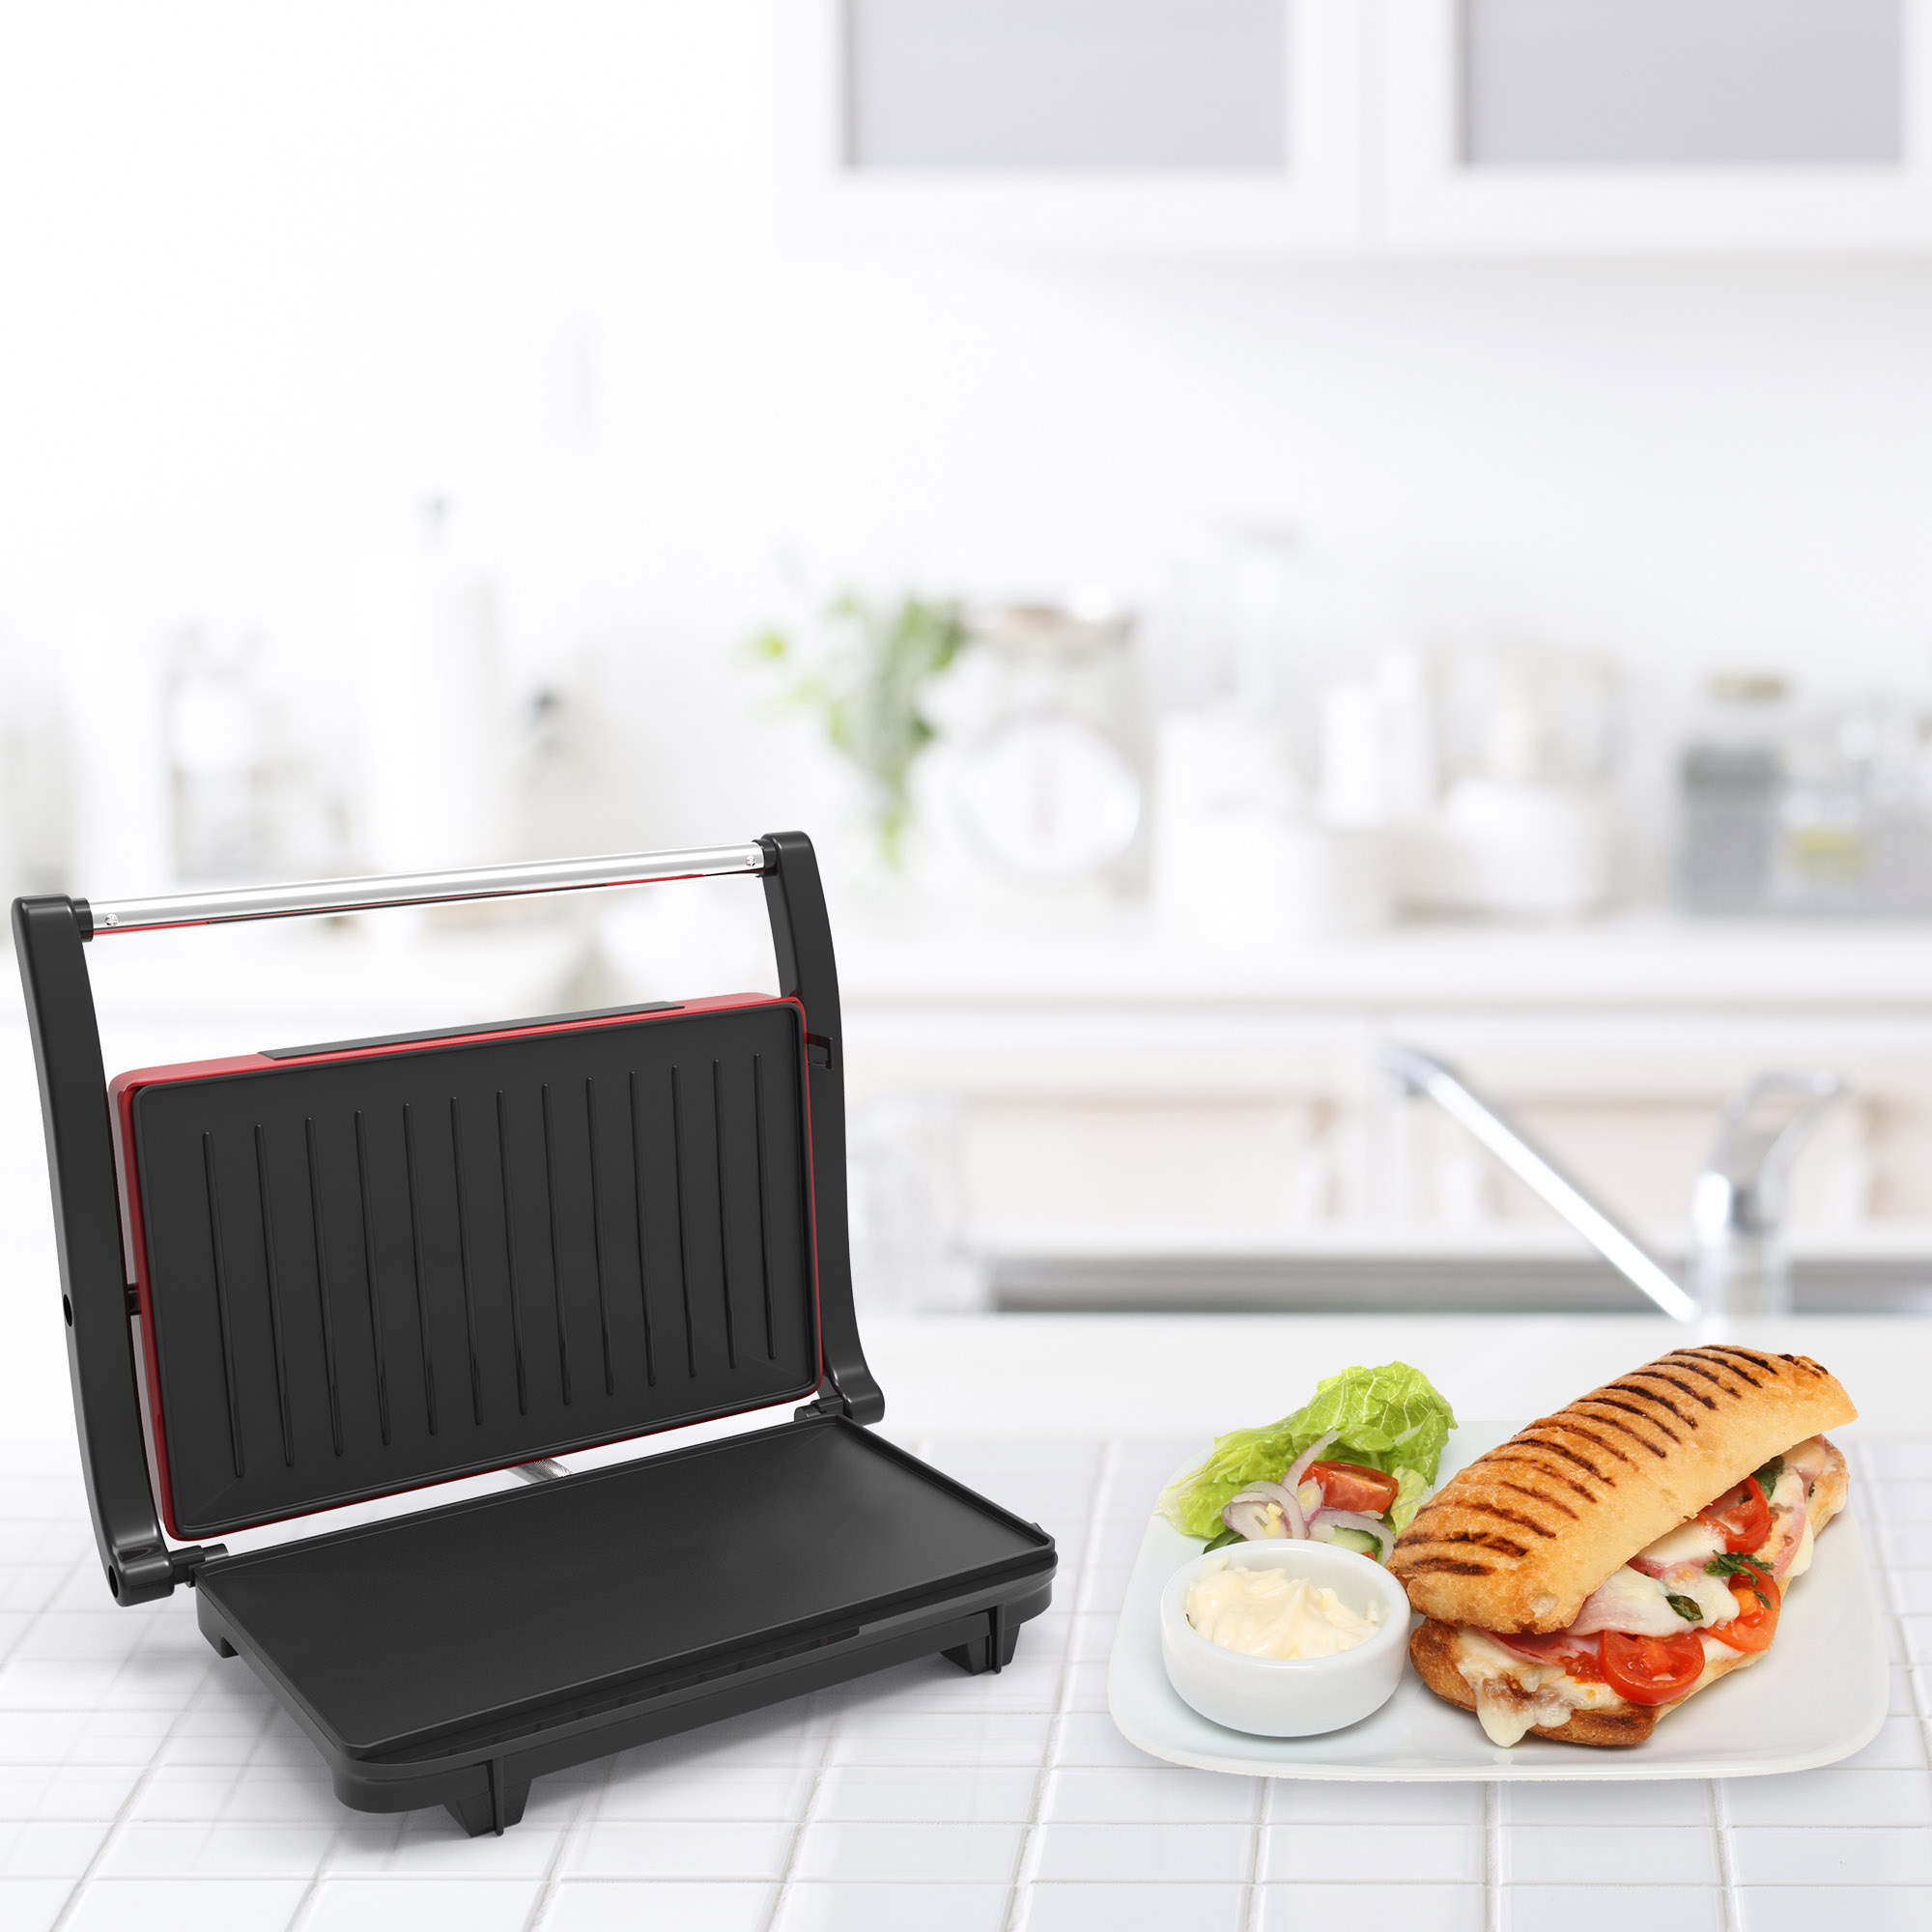 Chef Buddy Non-Stick Grill and Panini Press, Red - image 2 of 8